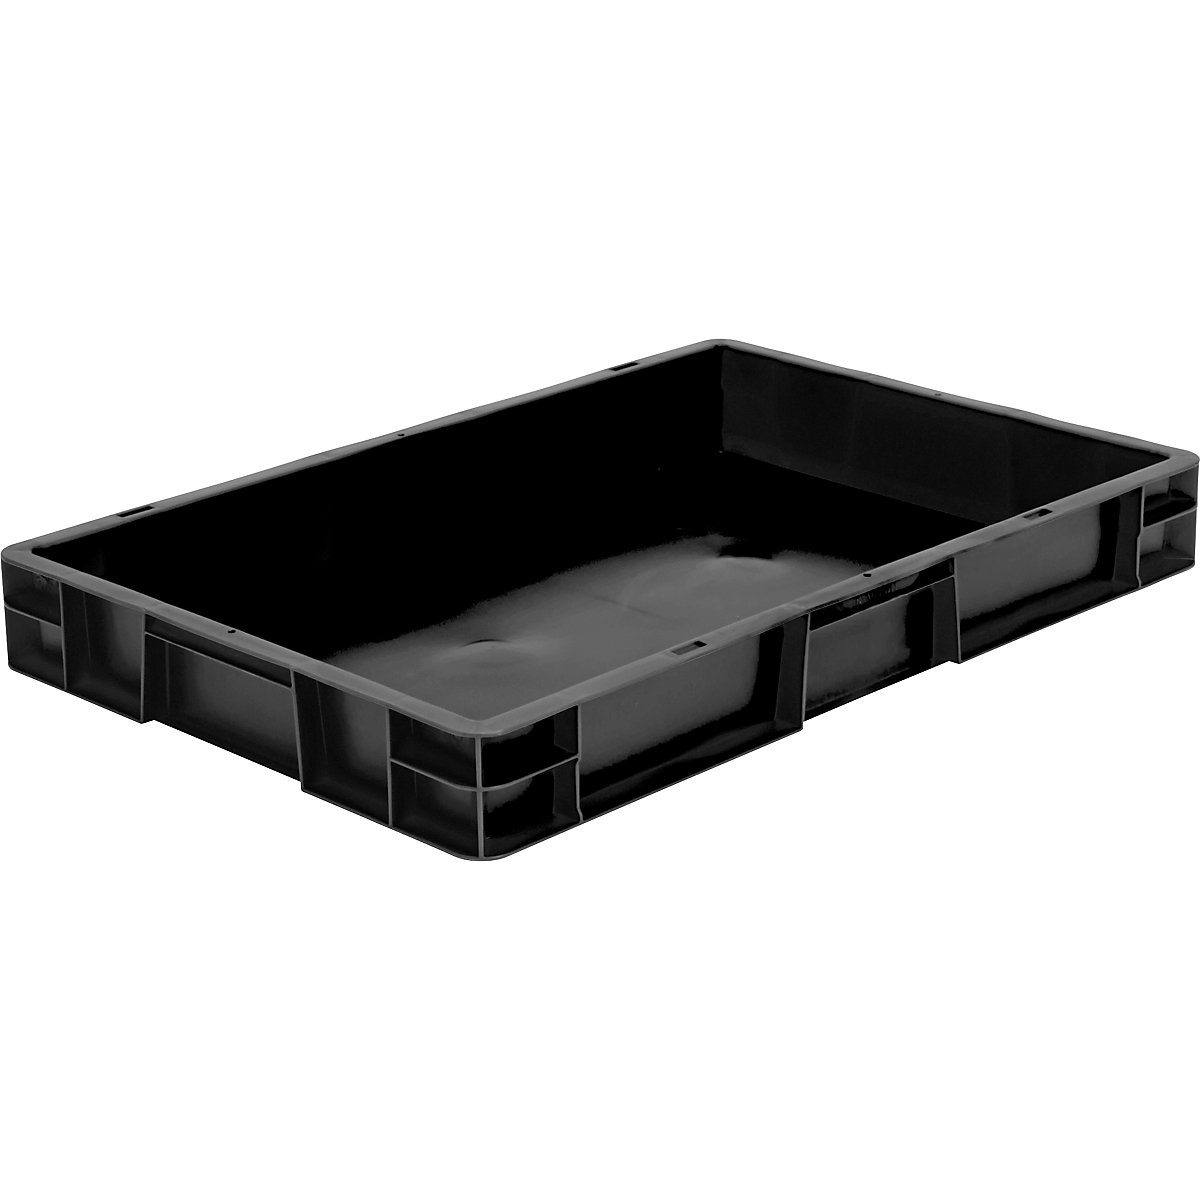 ESD stacking container, made of polypropylene, LxWxH 600 x 400 x 75 mm, pack of 2-4